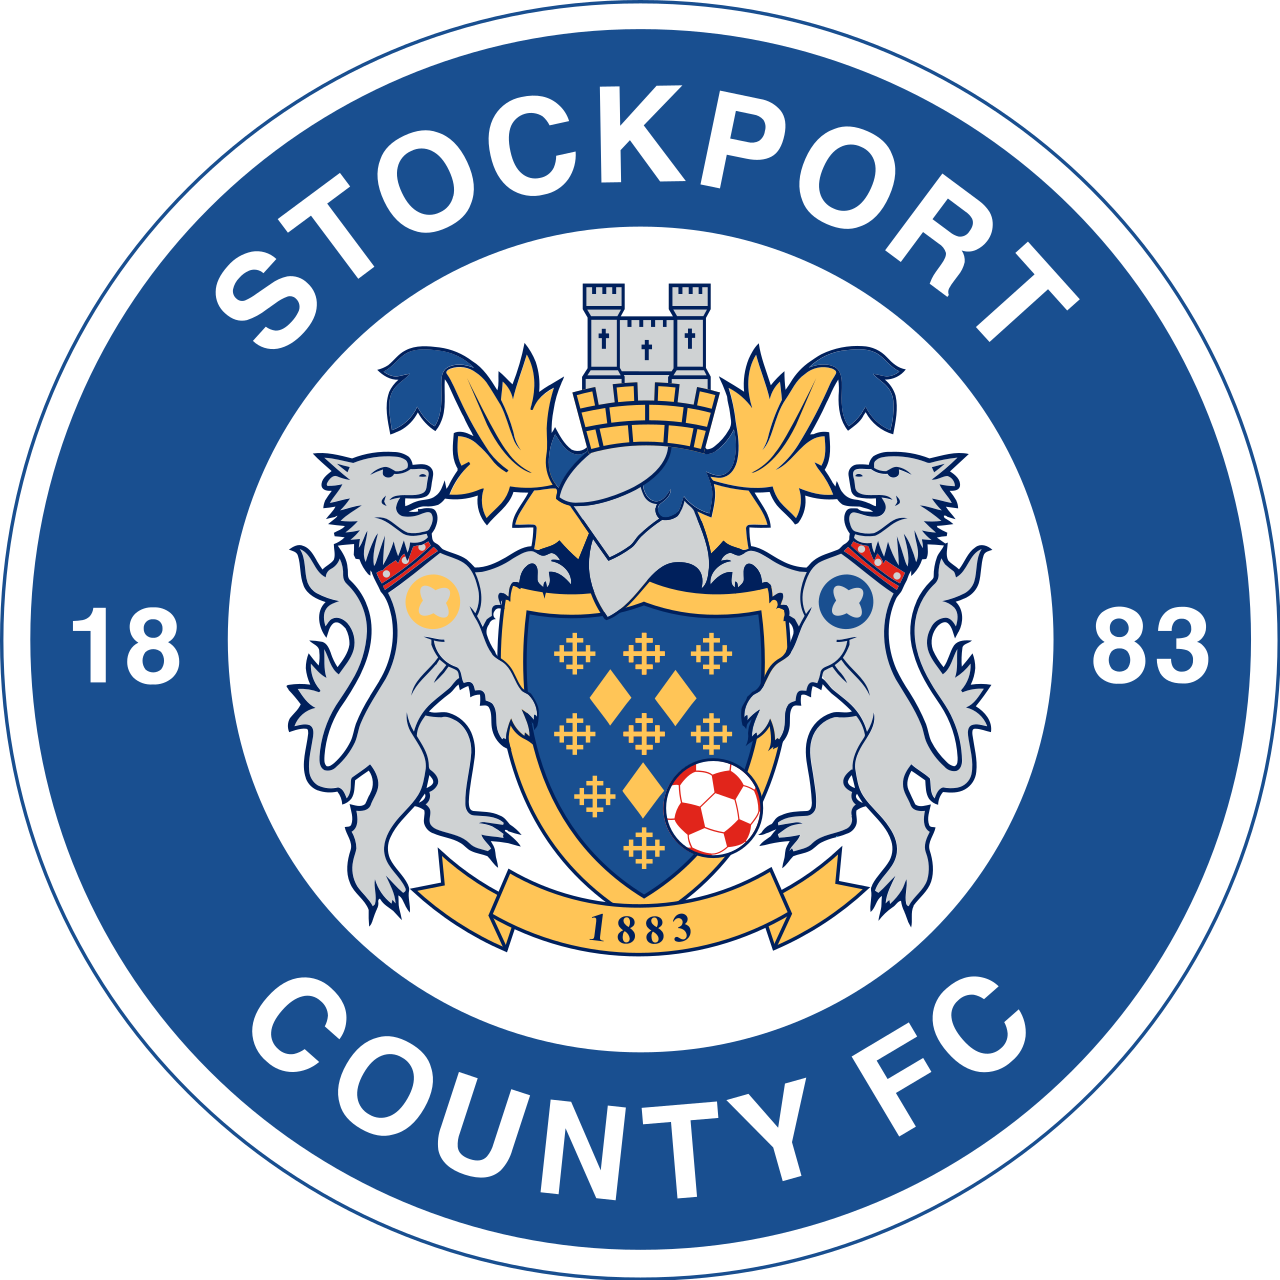 Buy   Stockport County Tickets